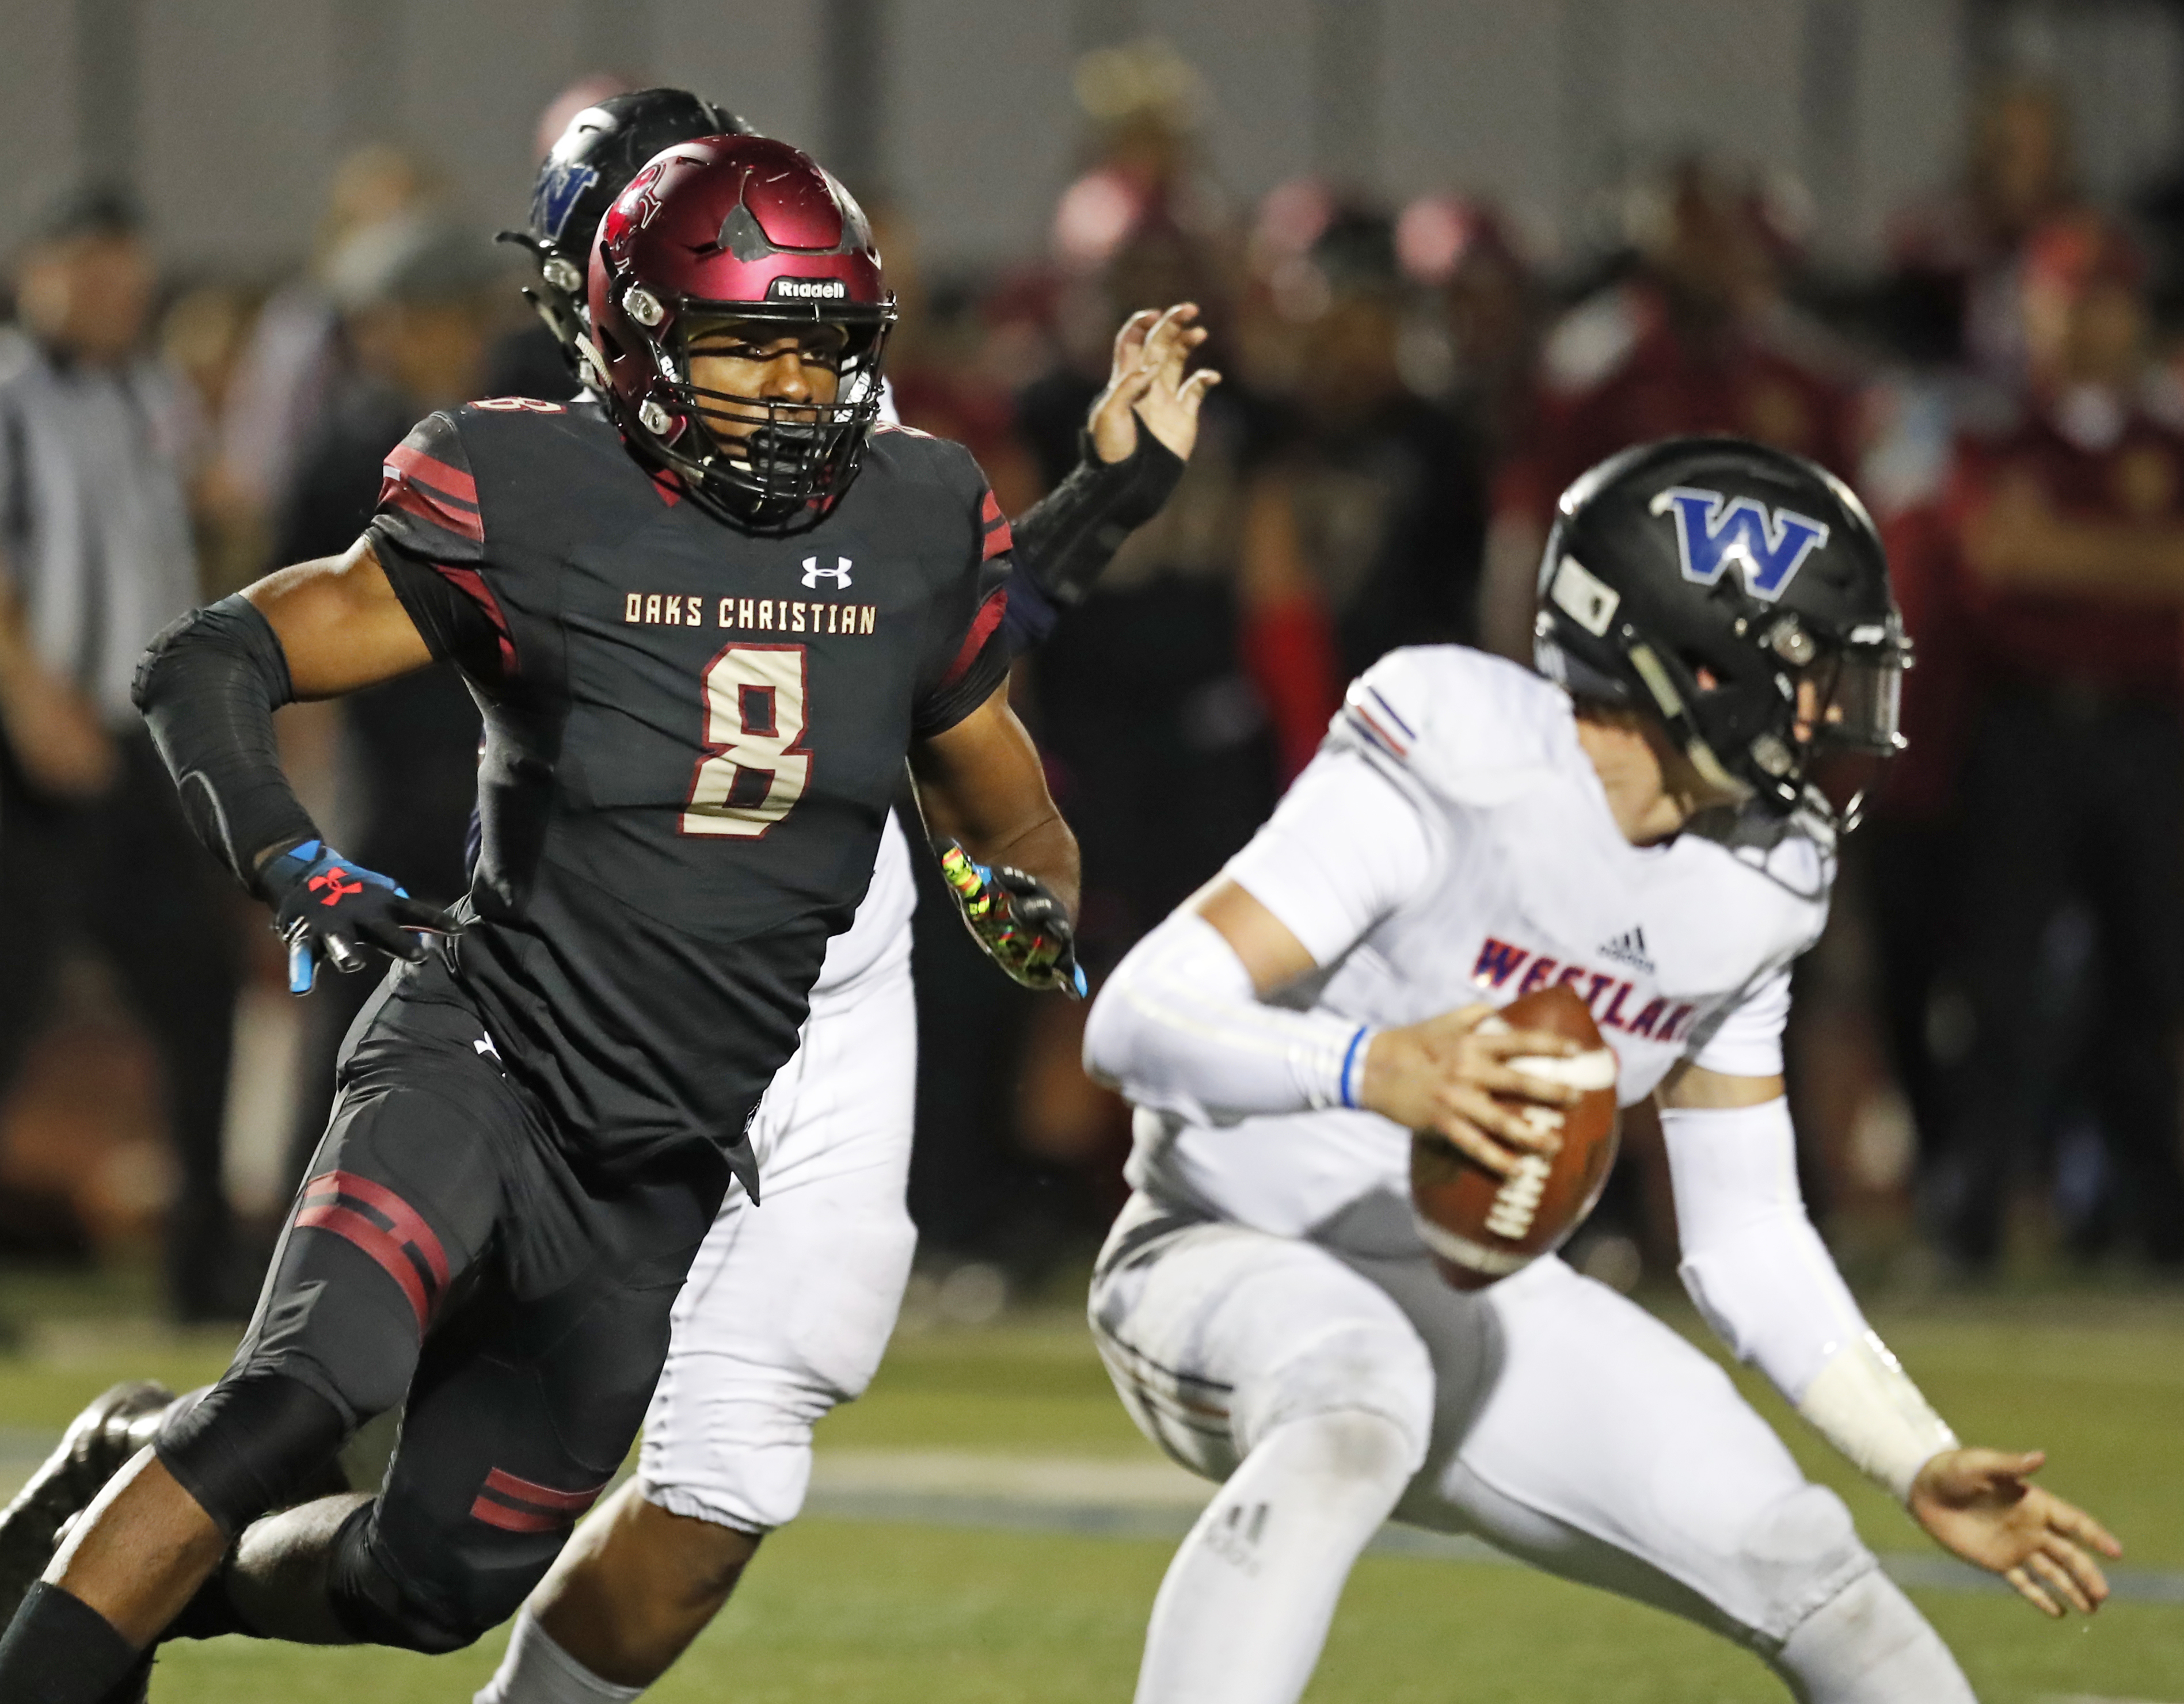 Gallery: Oaks Christian holds off Westlake in thrilling matchup